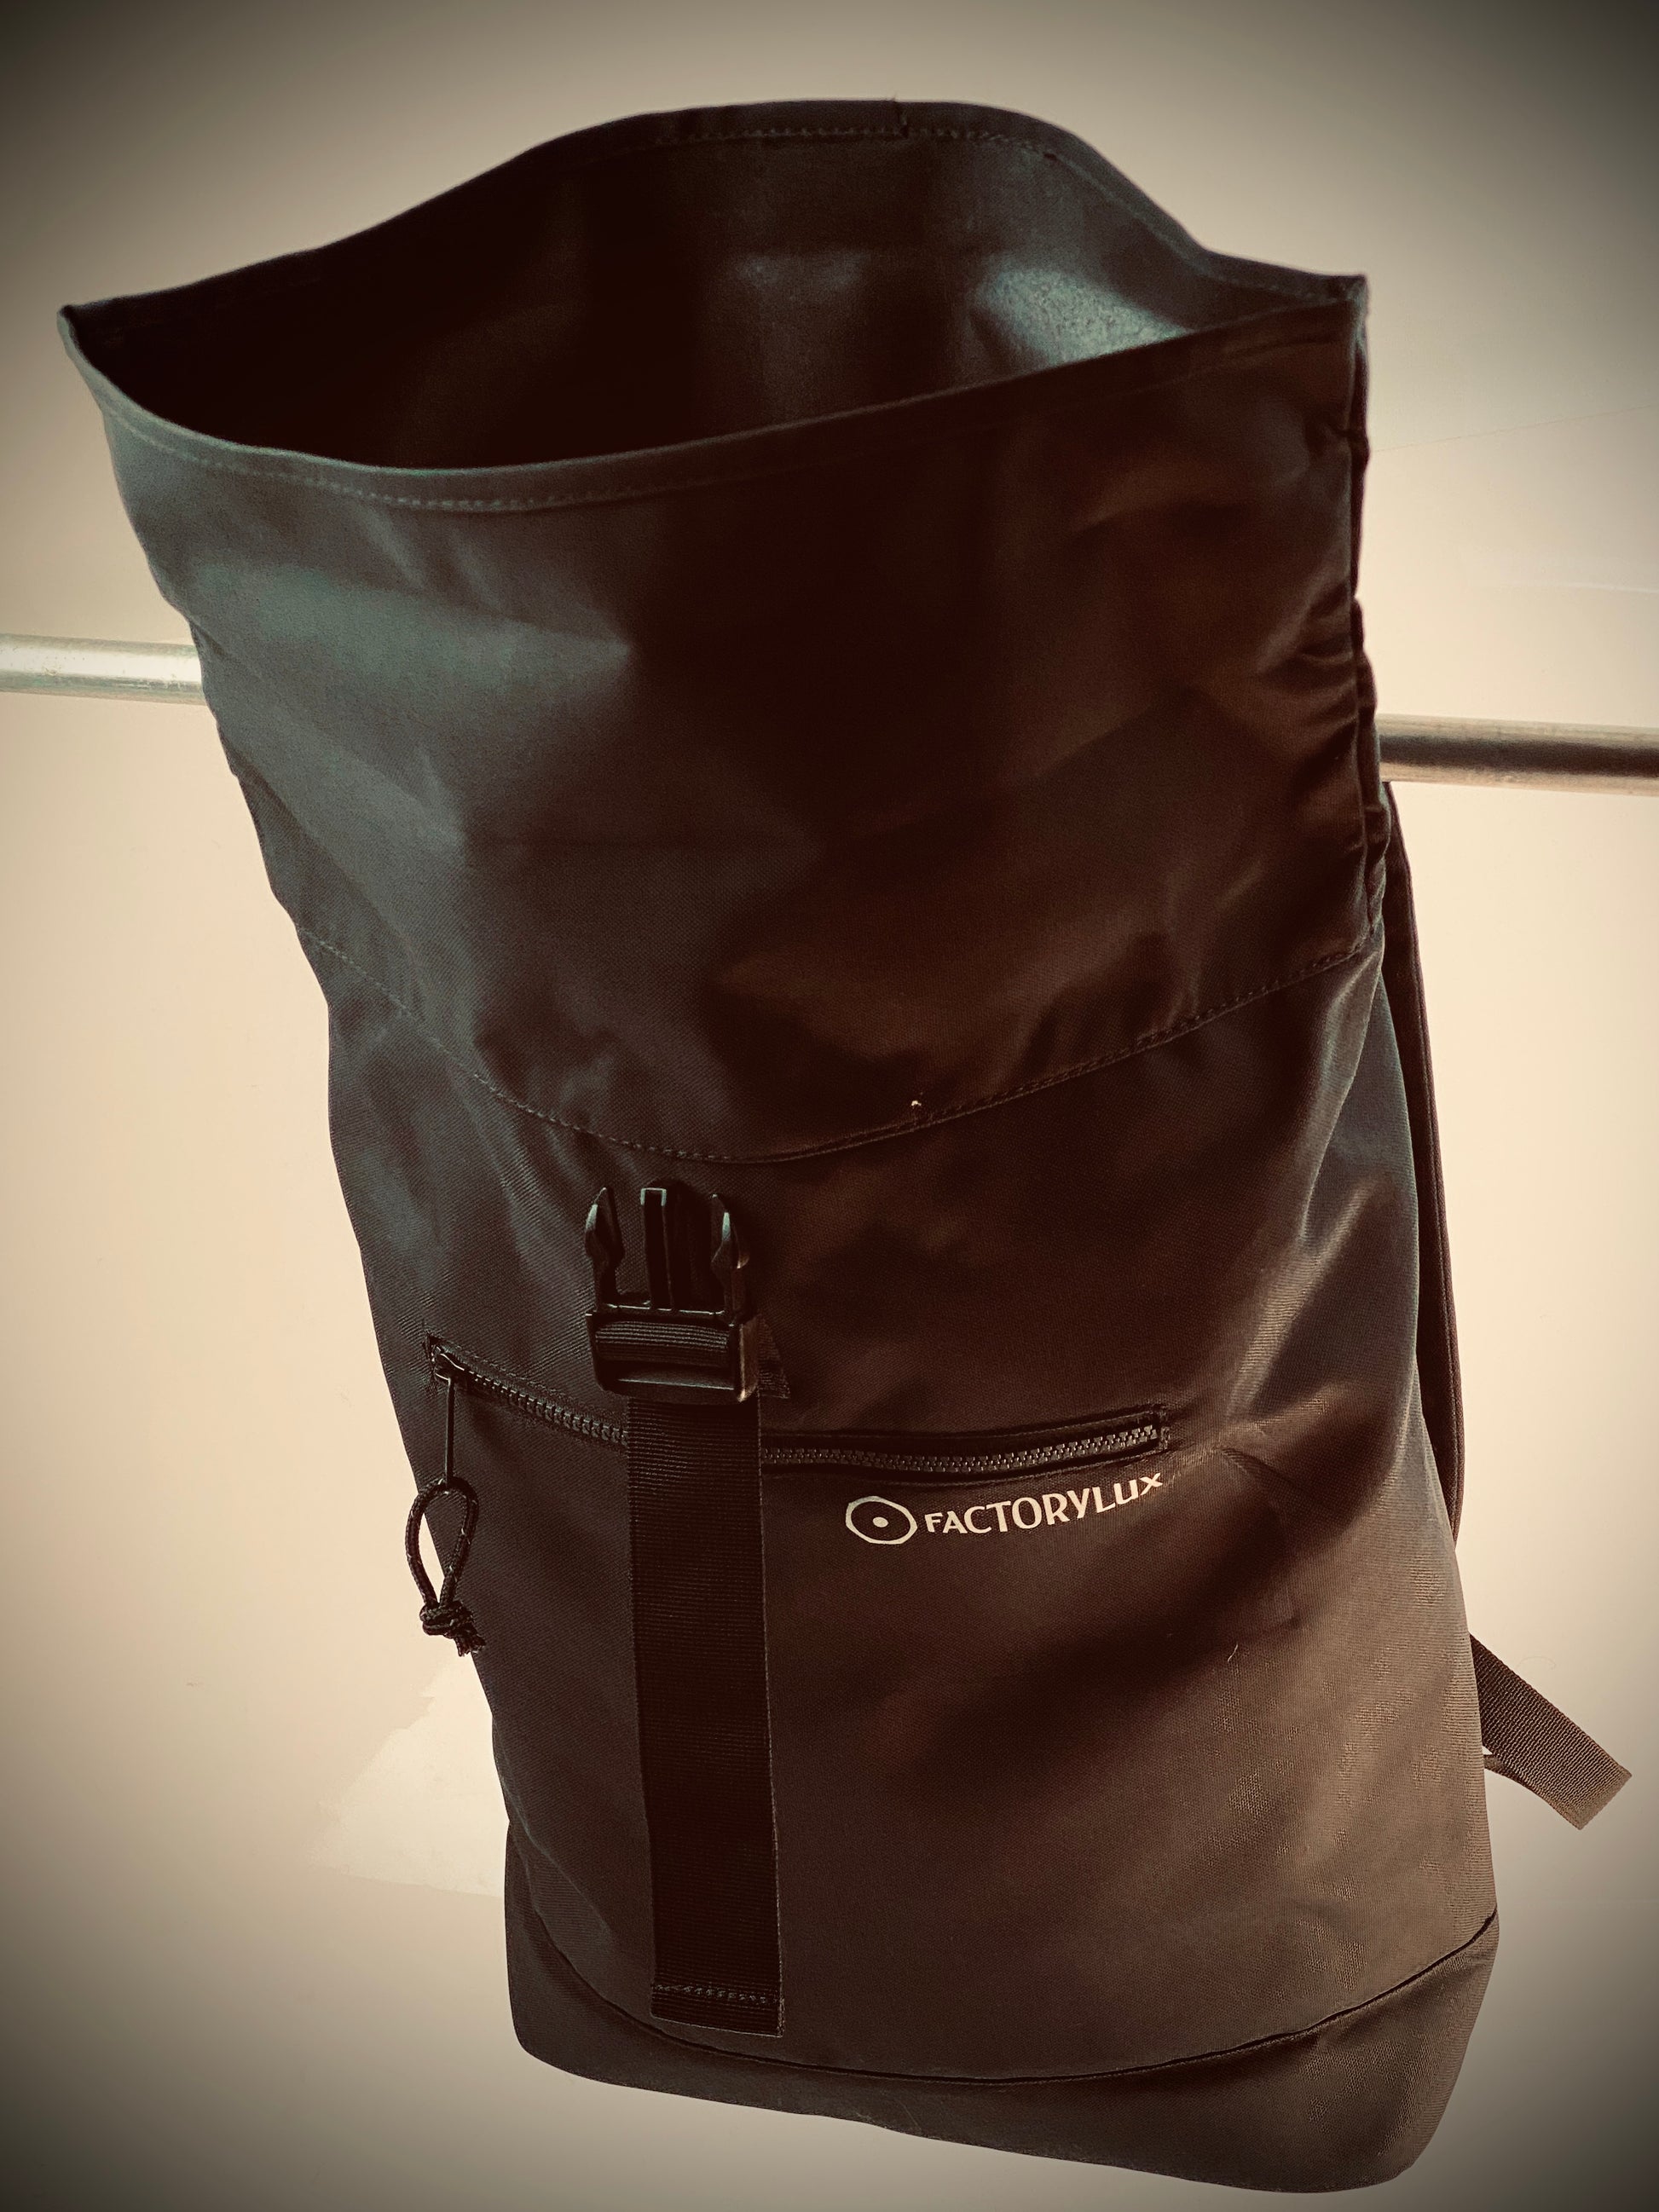 Open roll top Factorylux black, recycled polyester bag. 